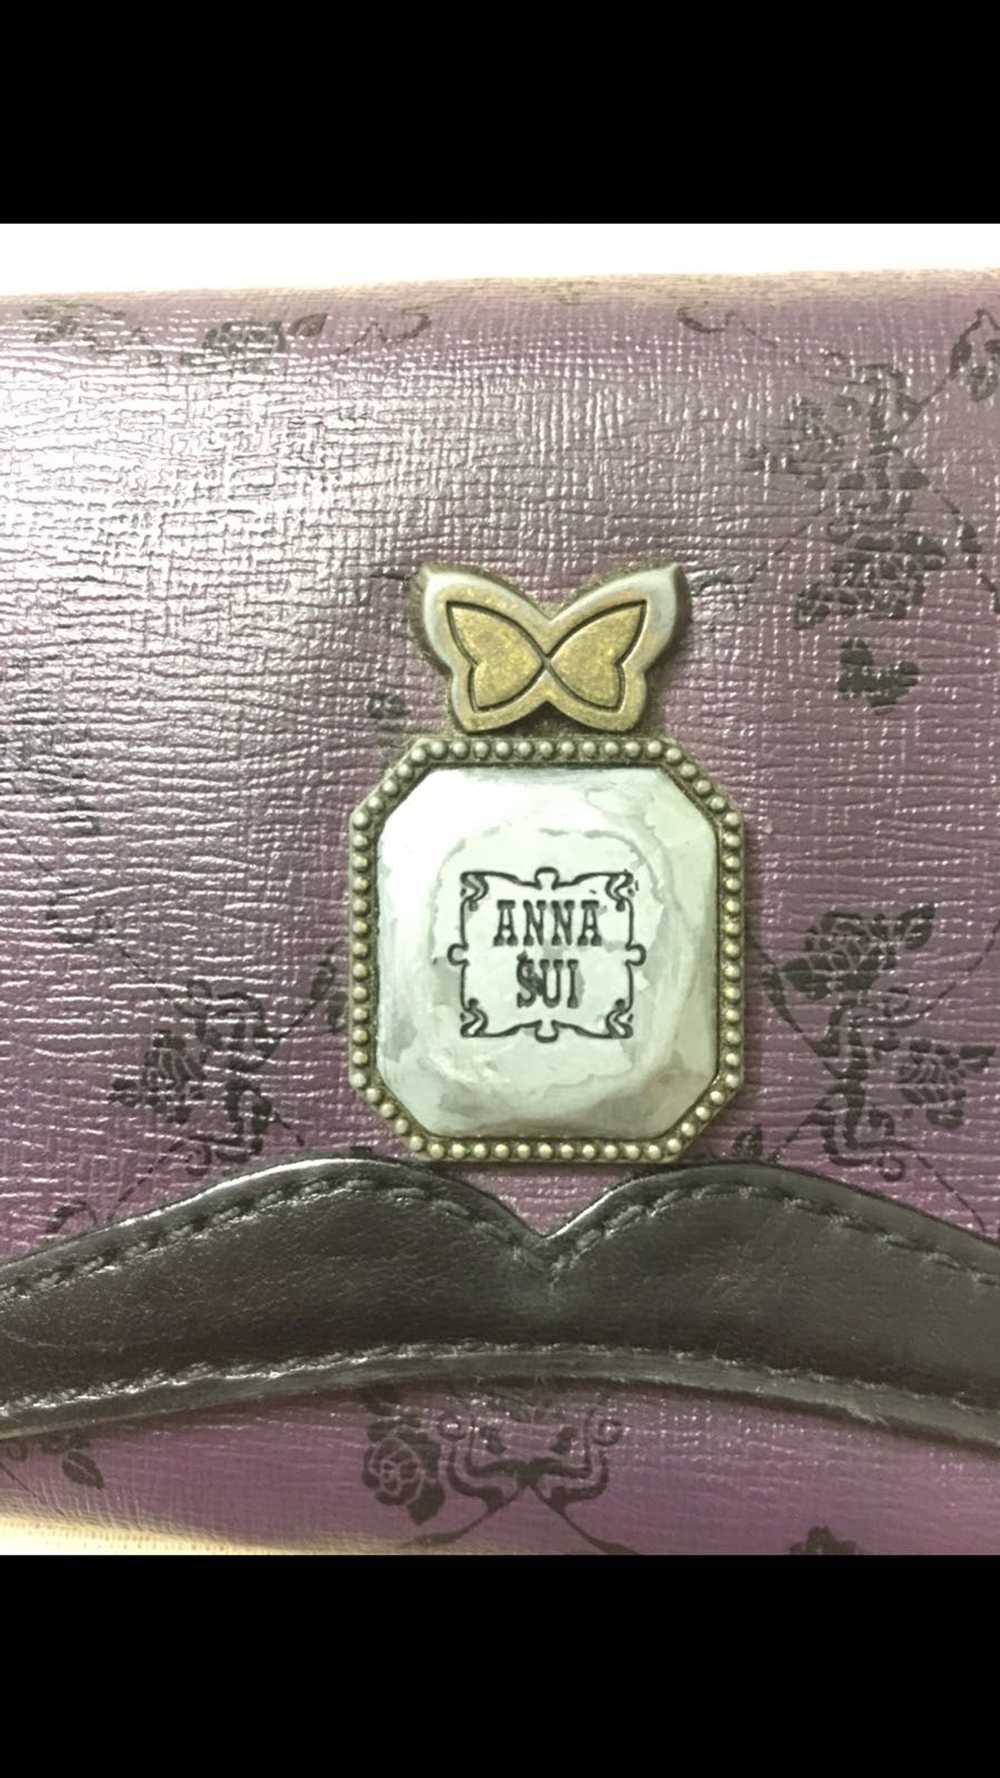 Anna Sui Anna sui long wallets - image 3